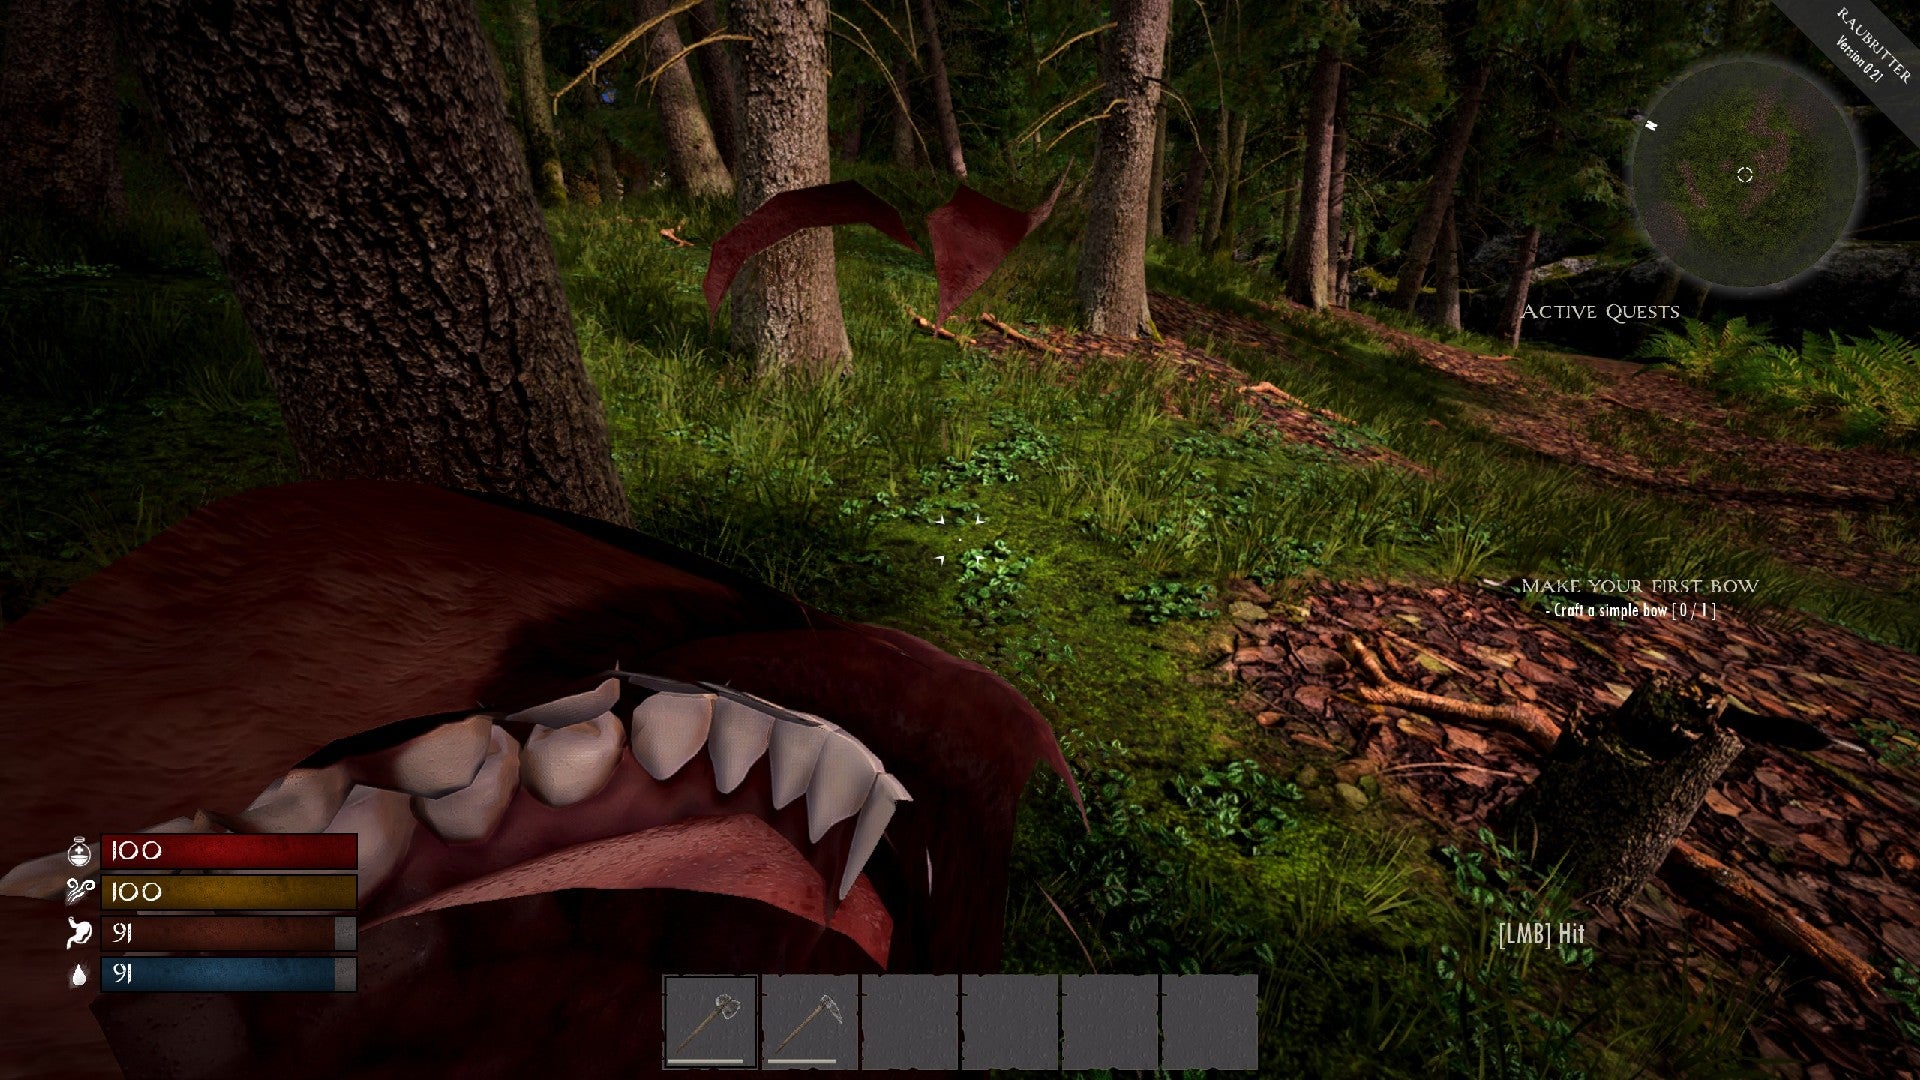 Raubritter demo screenshot showing the inside of the player's mouth and lots of teeth as the body glitches.